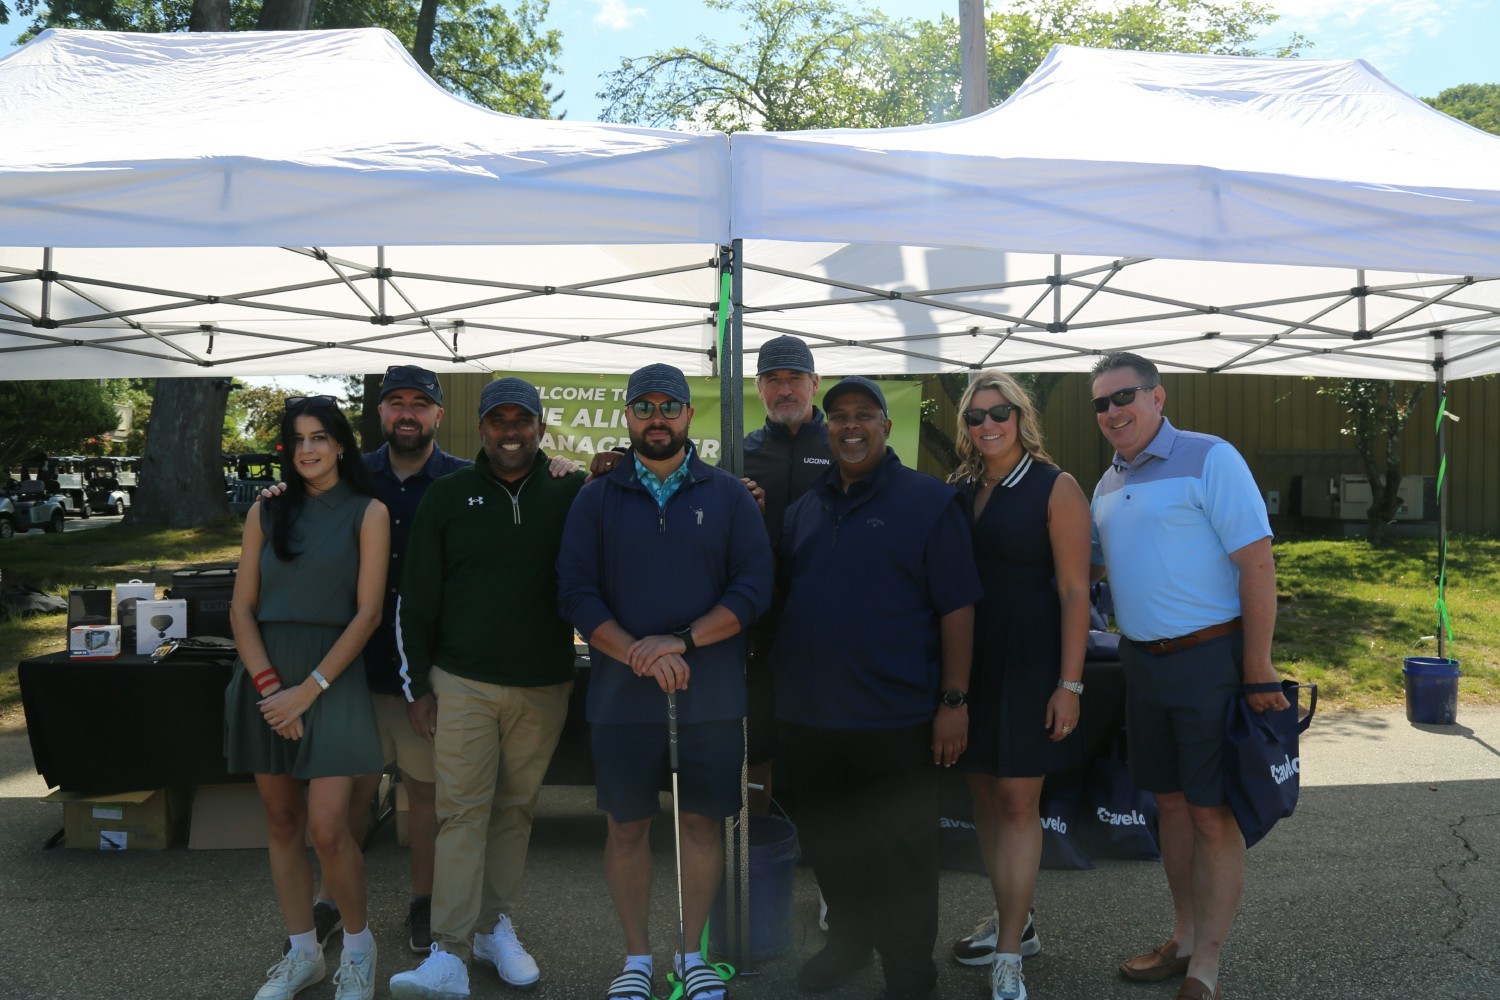 Our Align Managed Services team at our Annual Golf Outing, where we invite our clients to enjoy a day on the green!